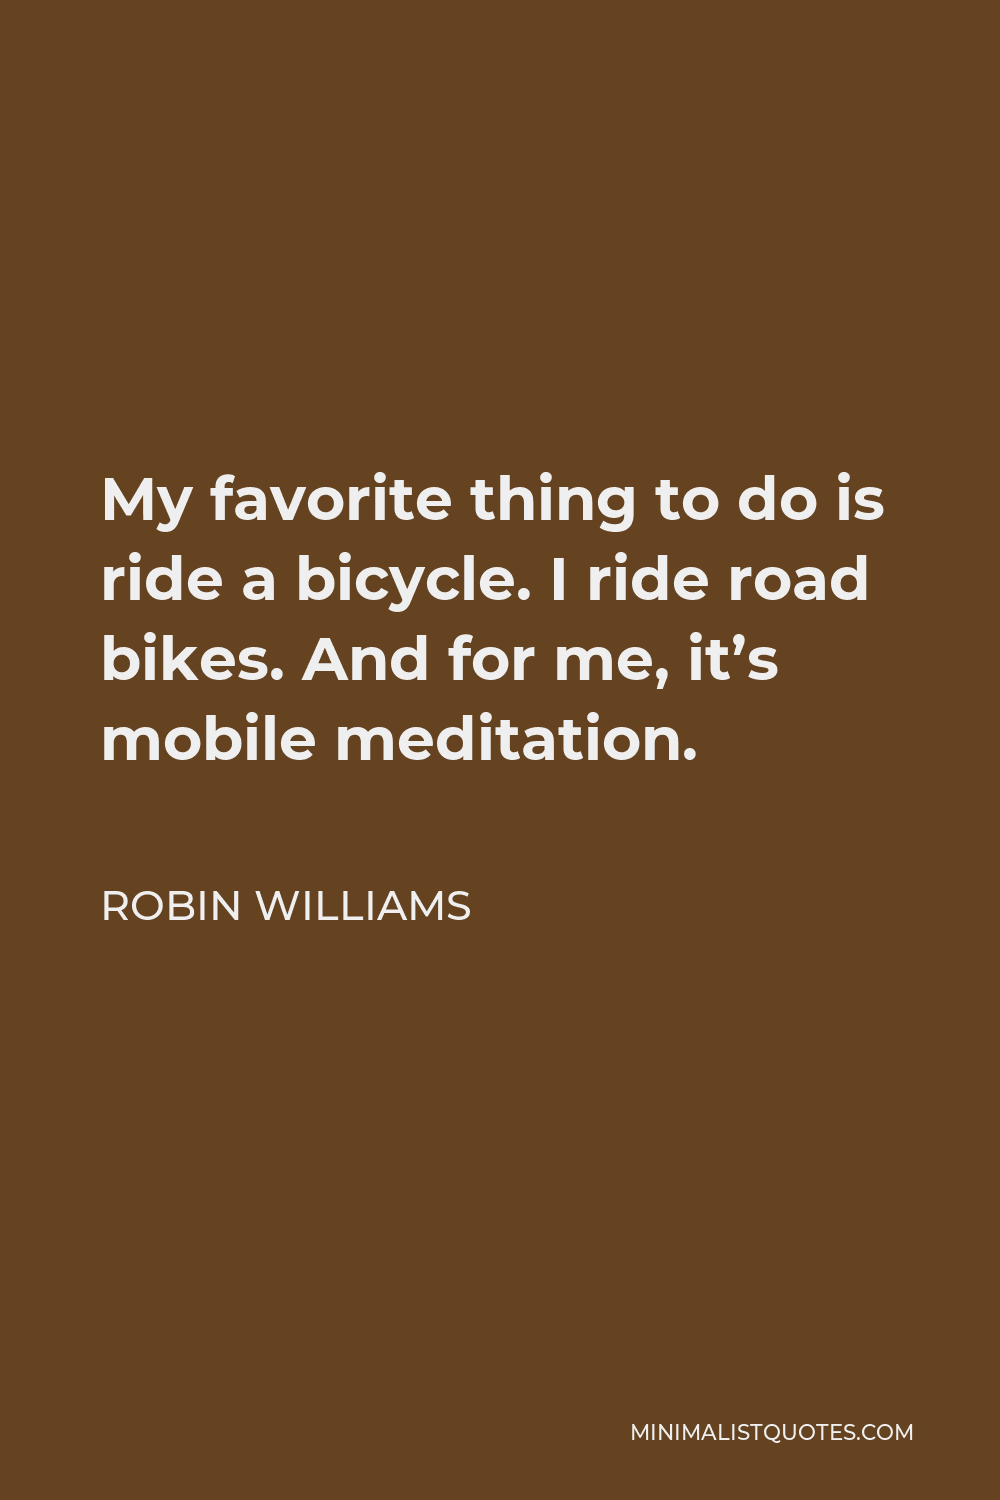 Robin Williams Quote - My favorite thing to do is ride a bicycle. I ride road bikes. And for me, it’s mobile meditation.